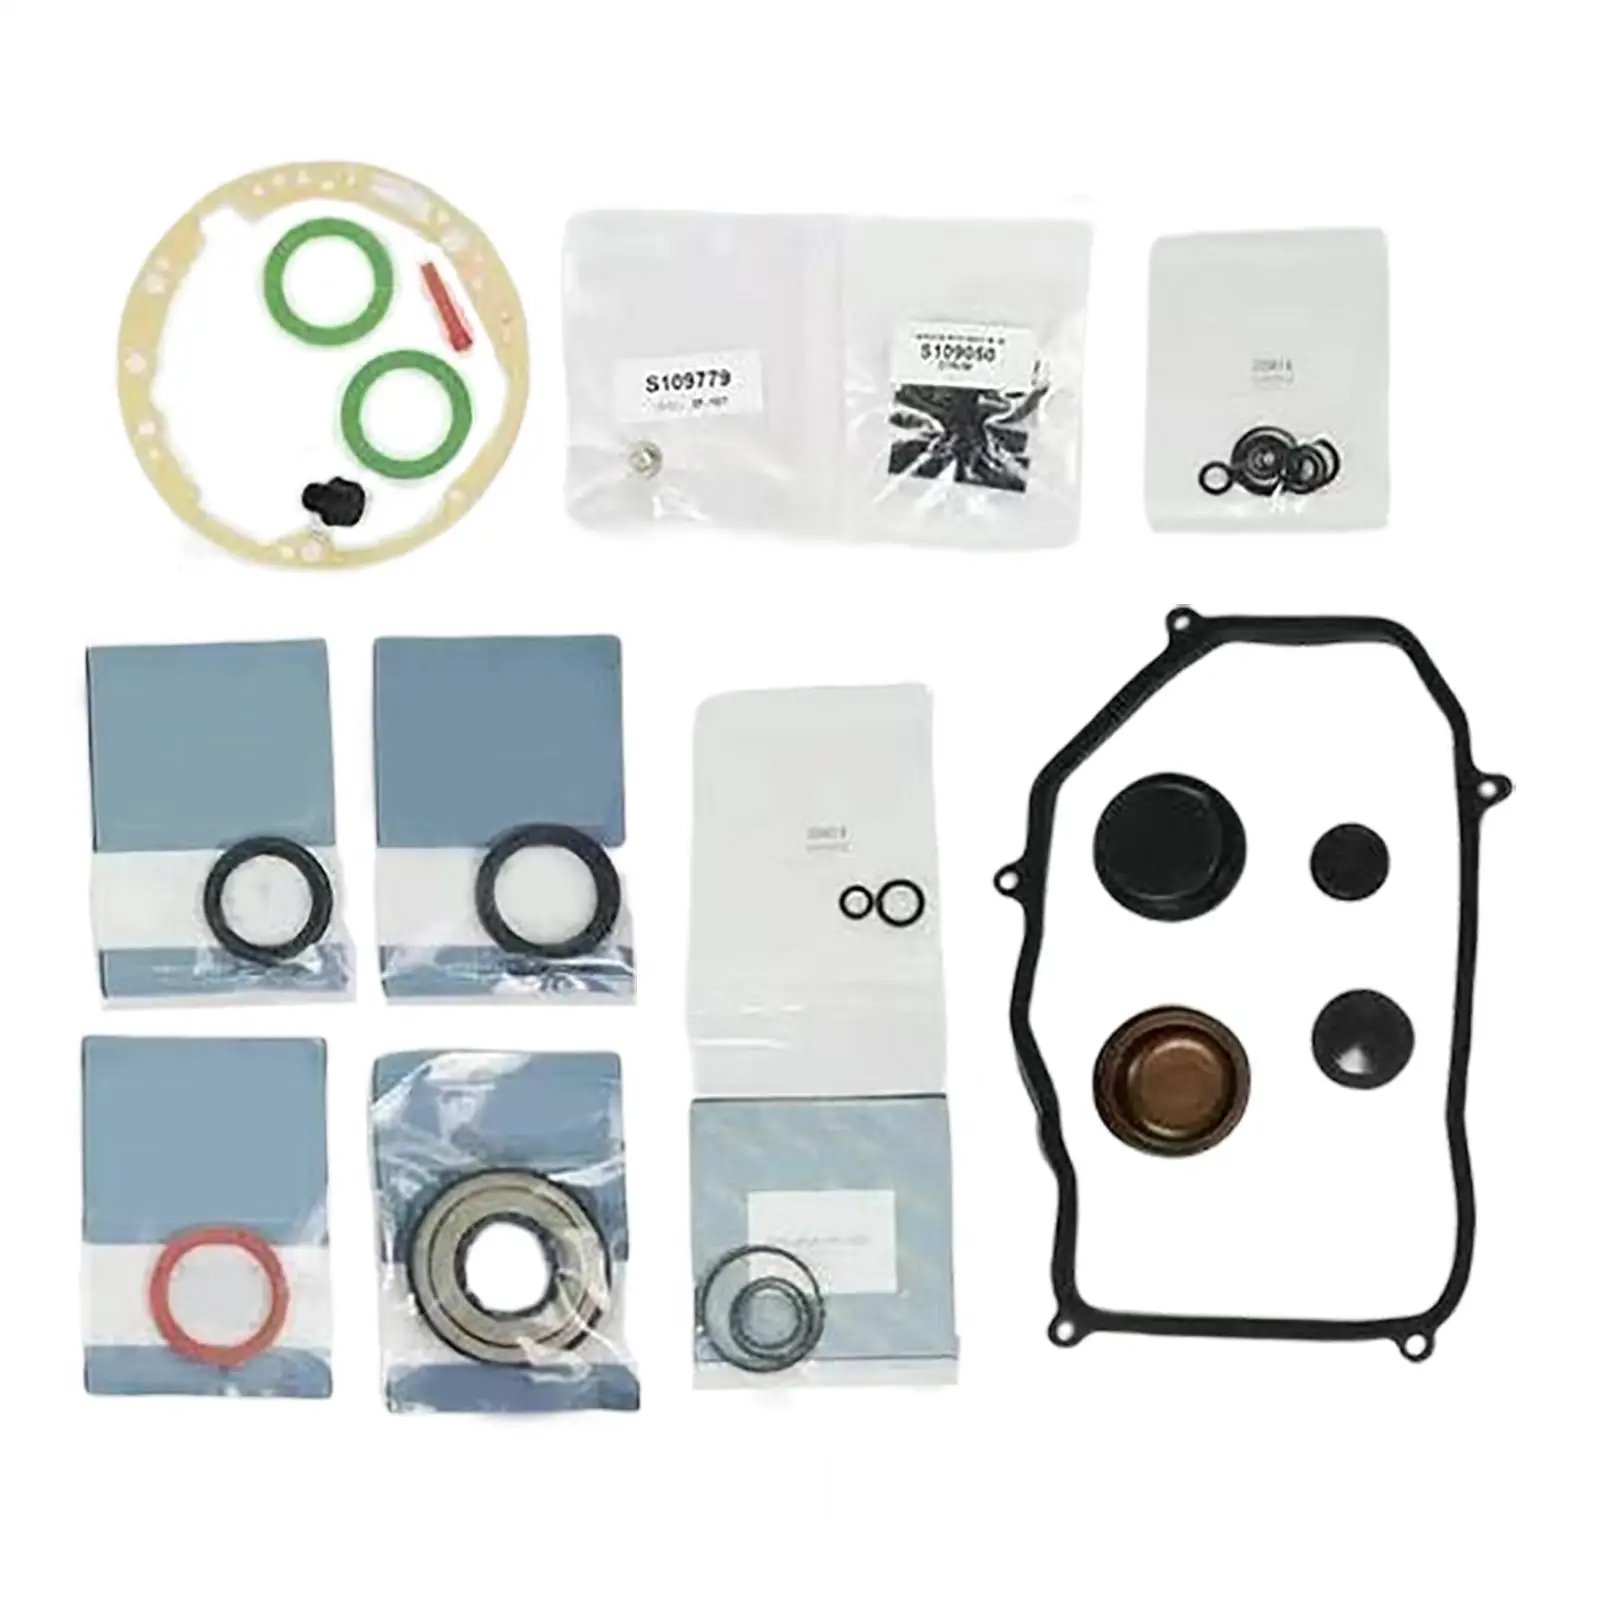 Automatic 01M 4  Transmission Overhaul Seal  Kit  Replacement  Trans MK4 1 001 Vehicle Parts, Car Supplies